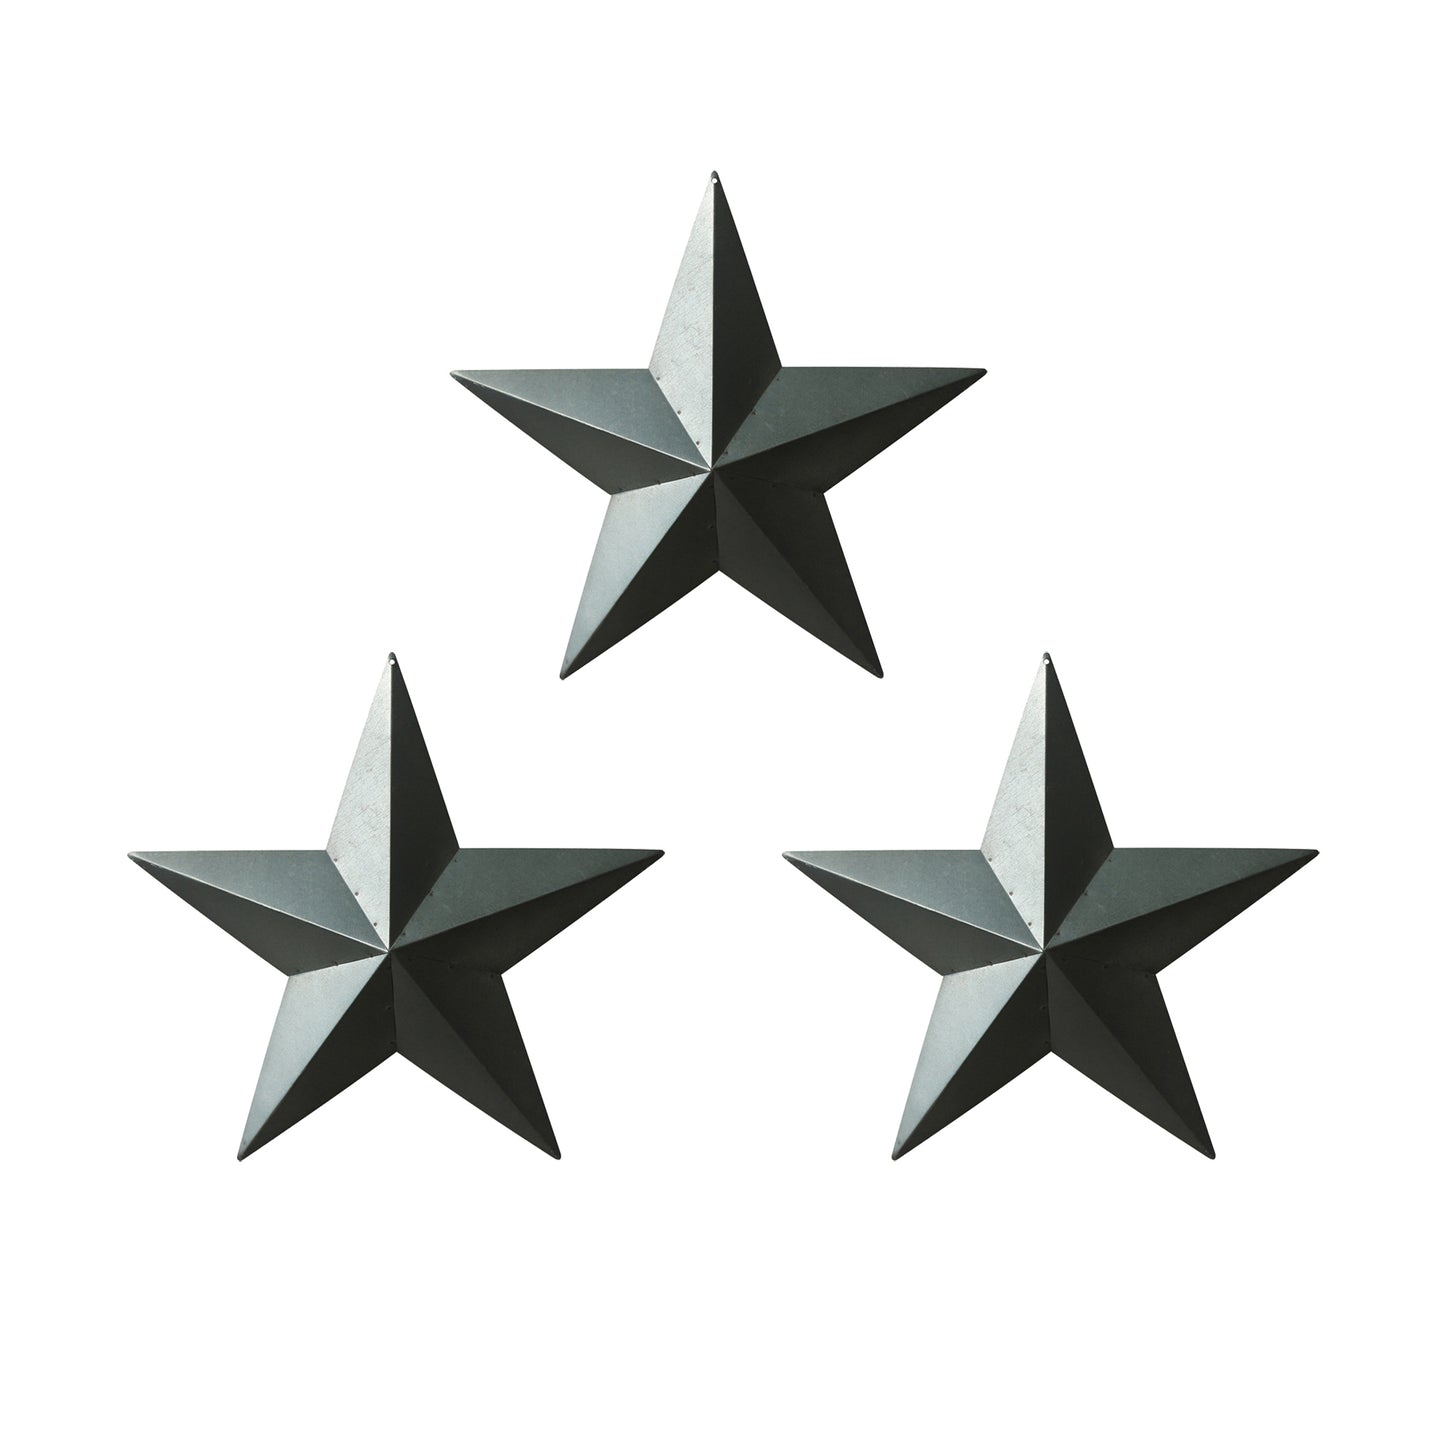 CVHOMEDECO. Country Rustic Antique Vintage Gifts Grungy Desert Sage Metal Barn Star Wall/Door Decor, 8 Inch, Set of 3.